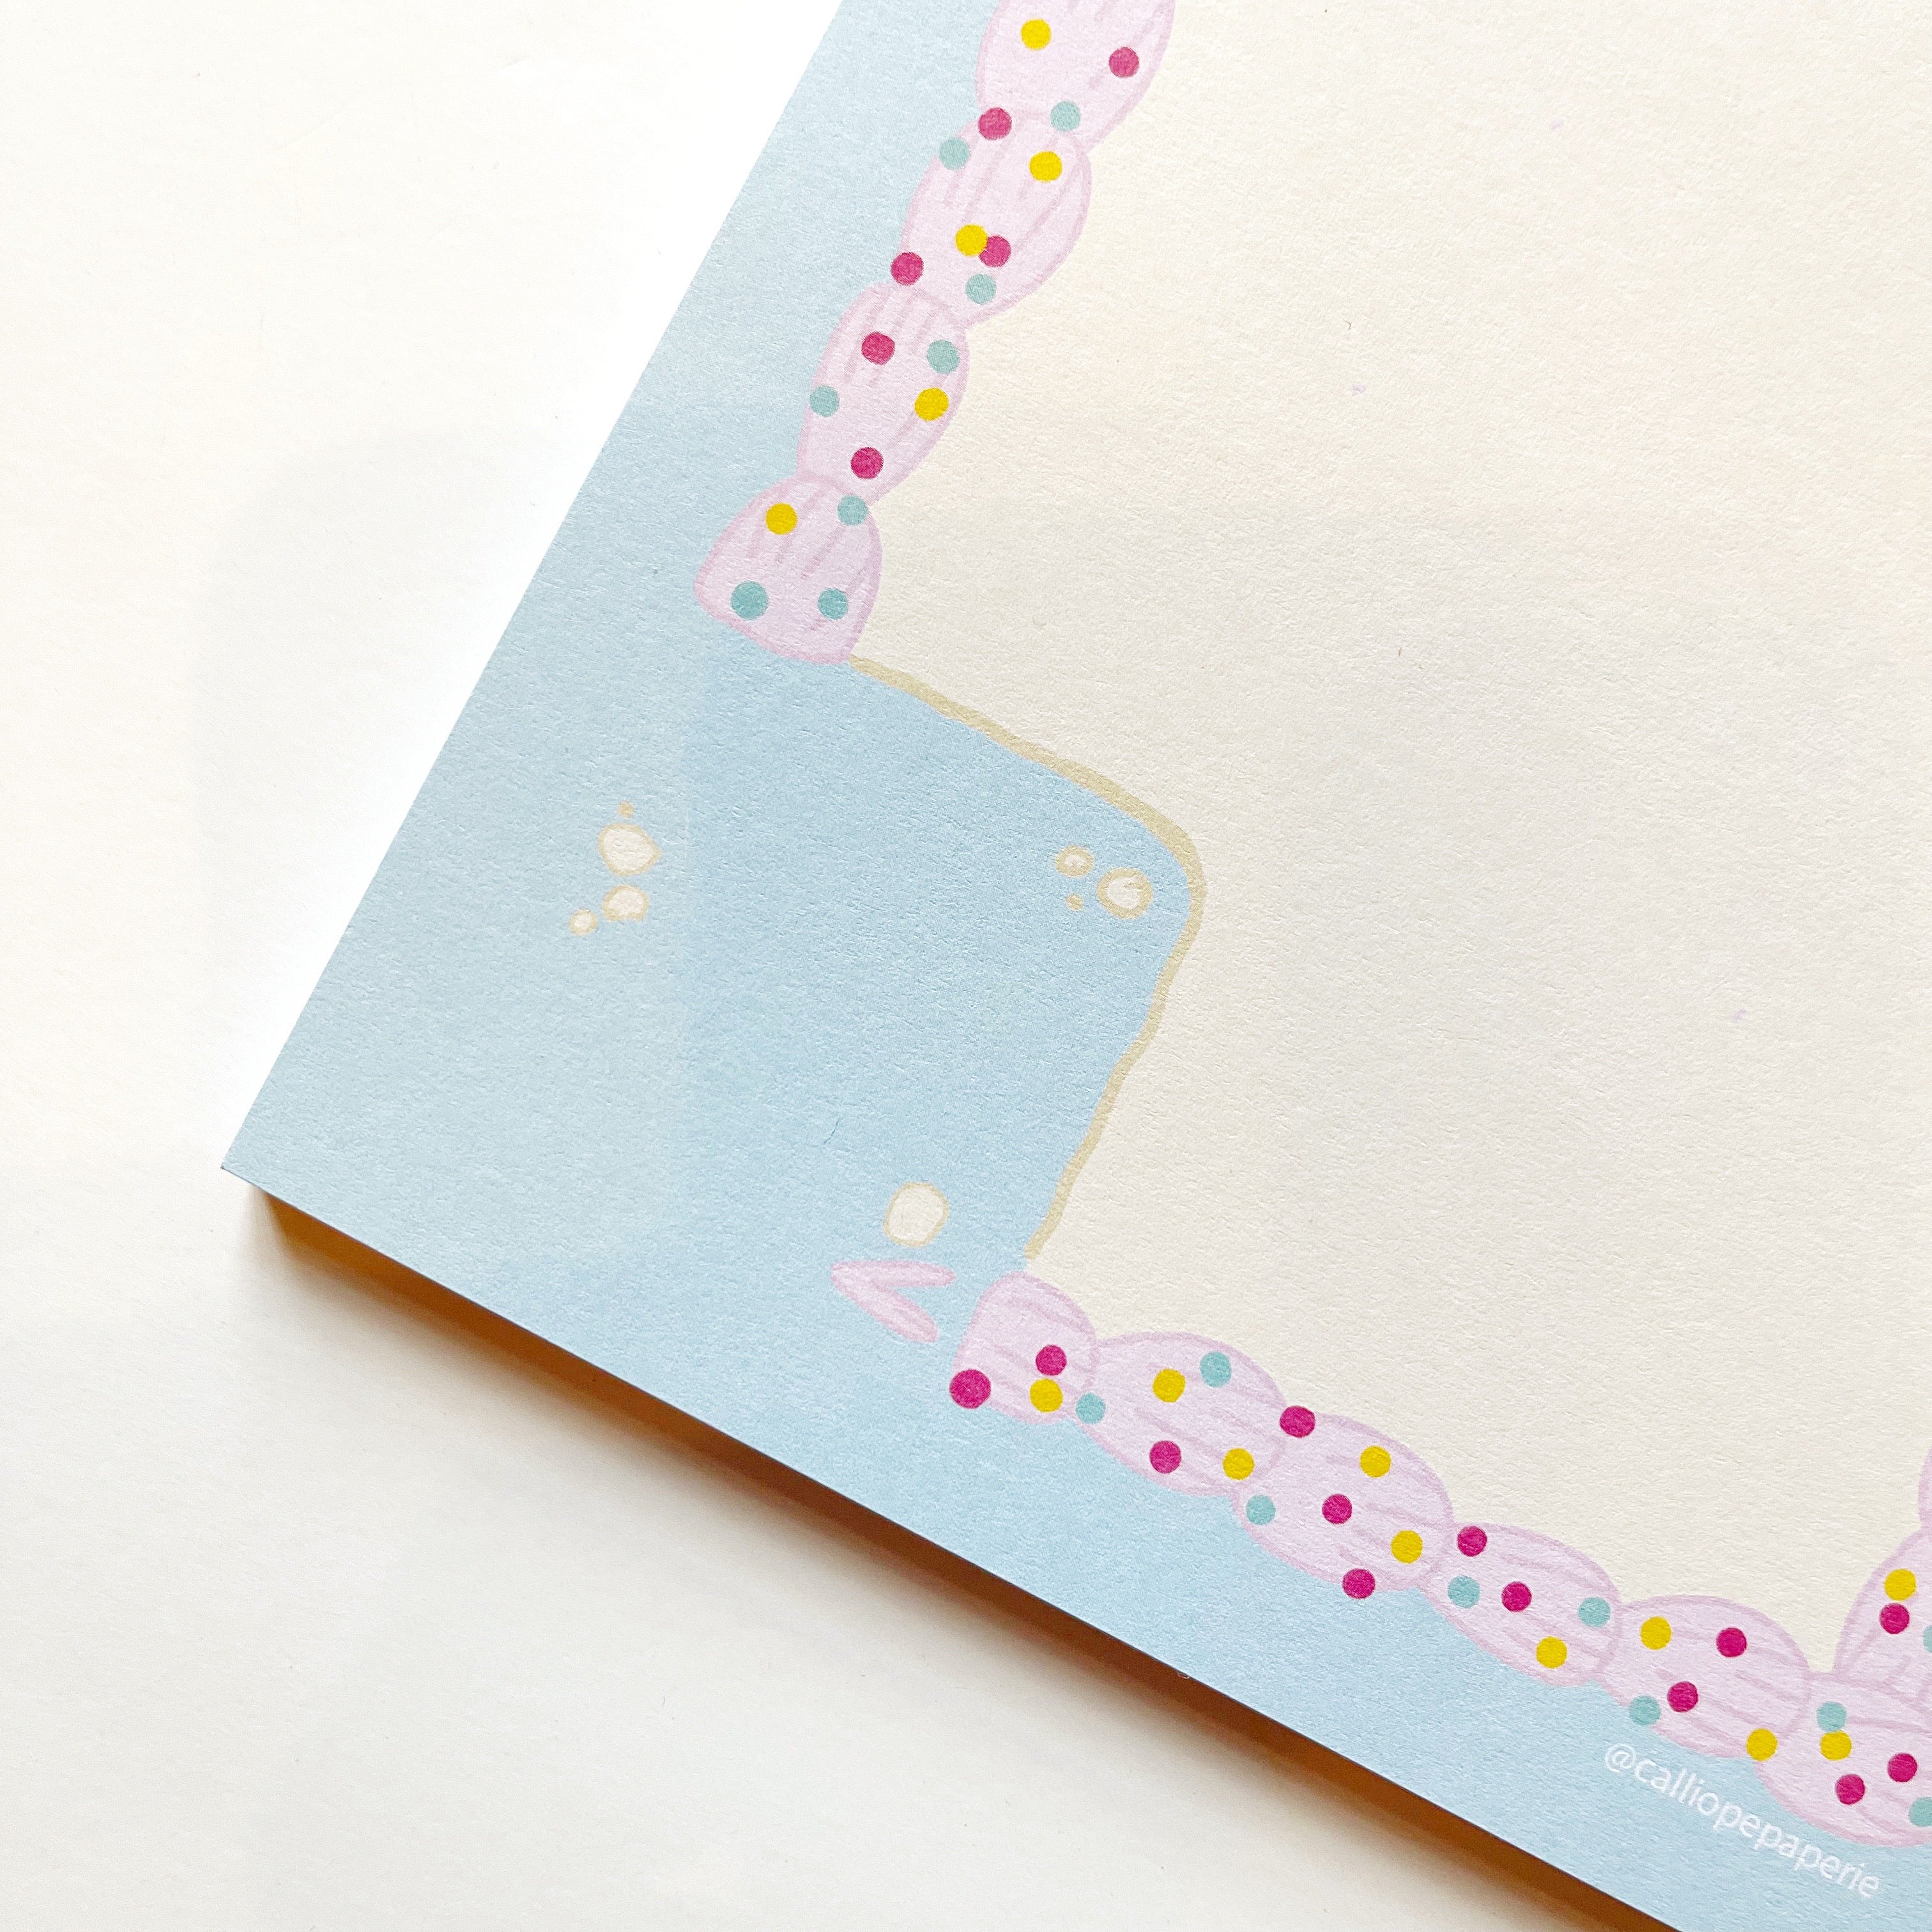 Image of notepad with white background bordered with light blue and pink frosting rectangle with colorful sprinkles with a square corner removed.